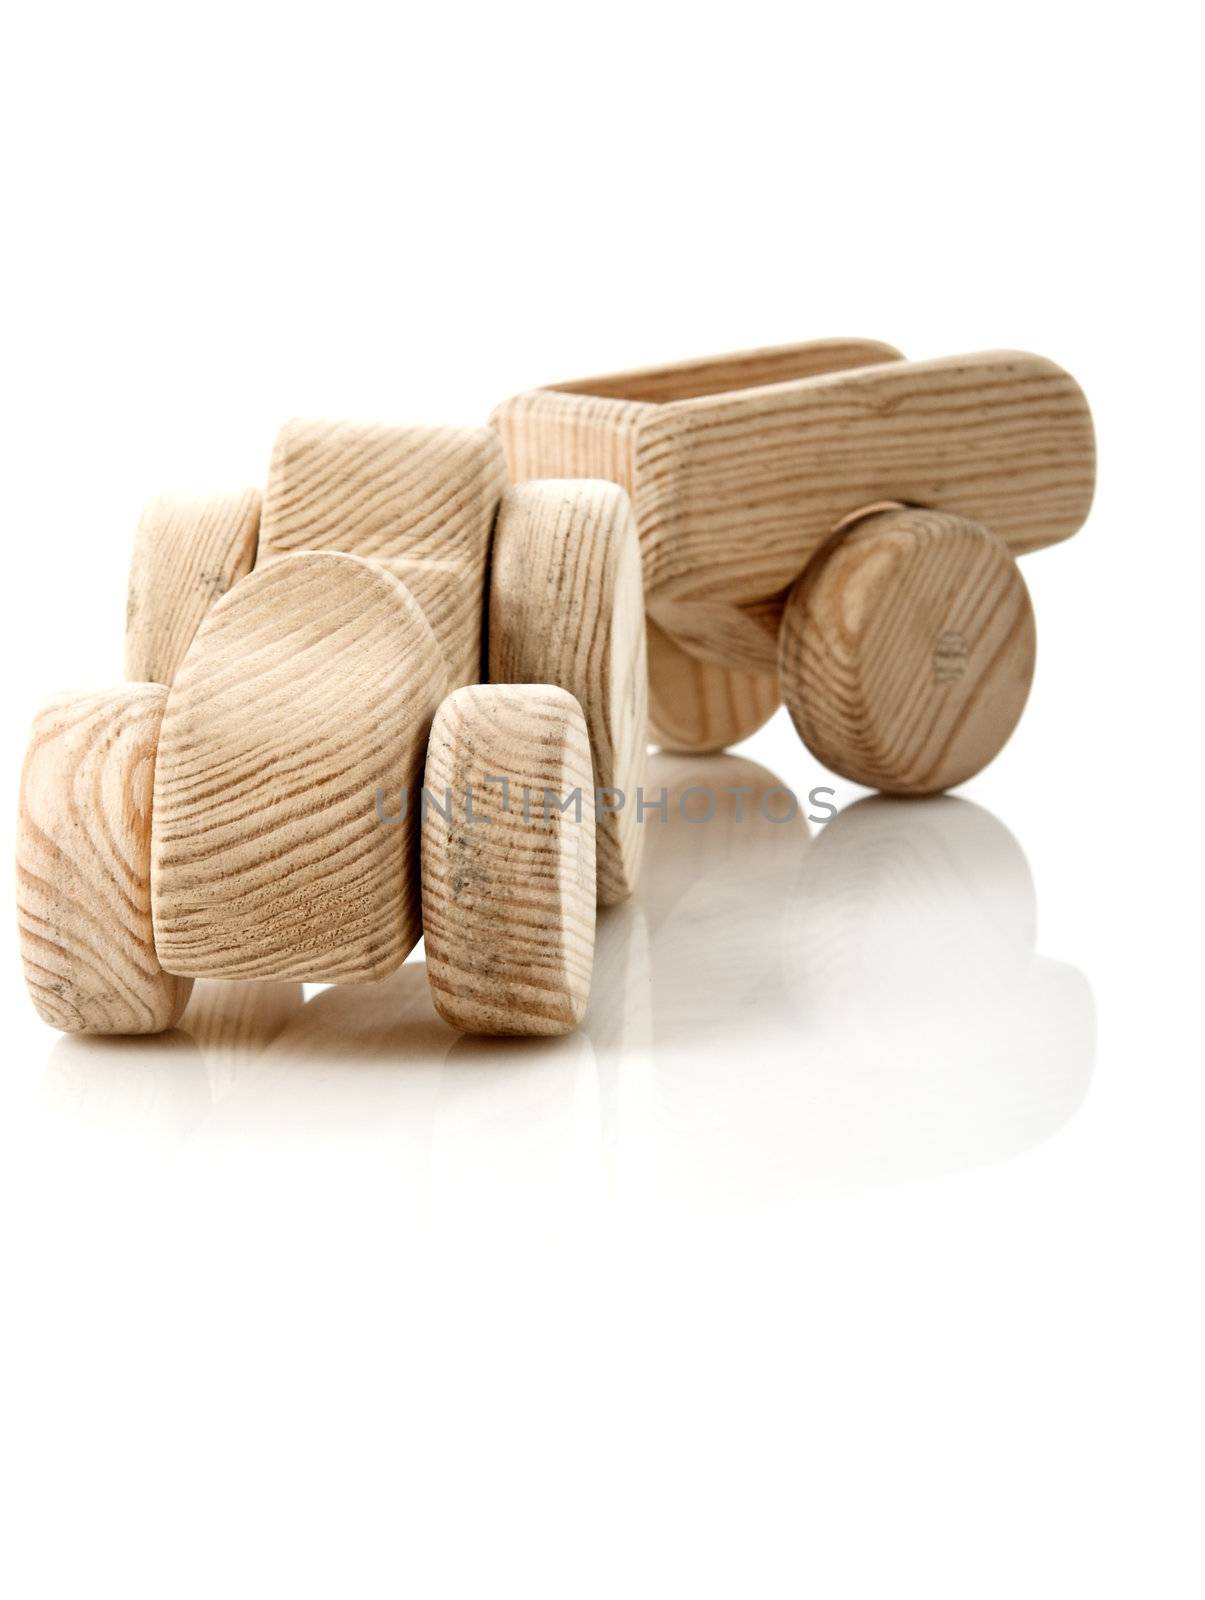 Wooden toy by Iko